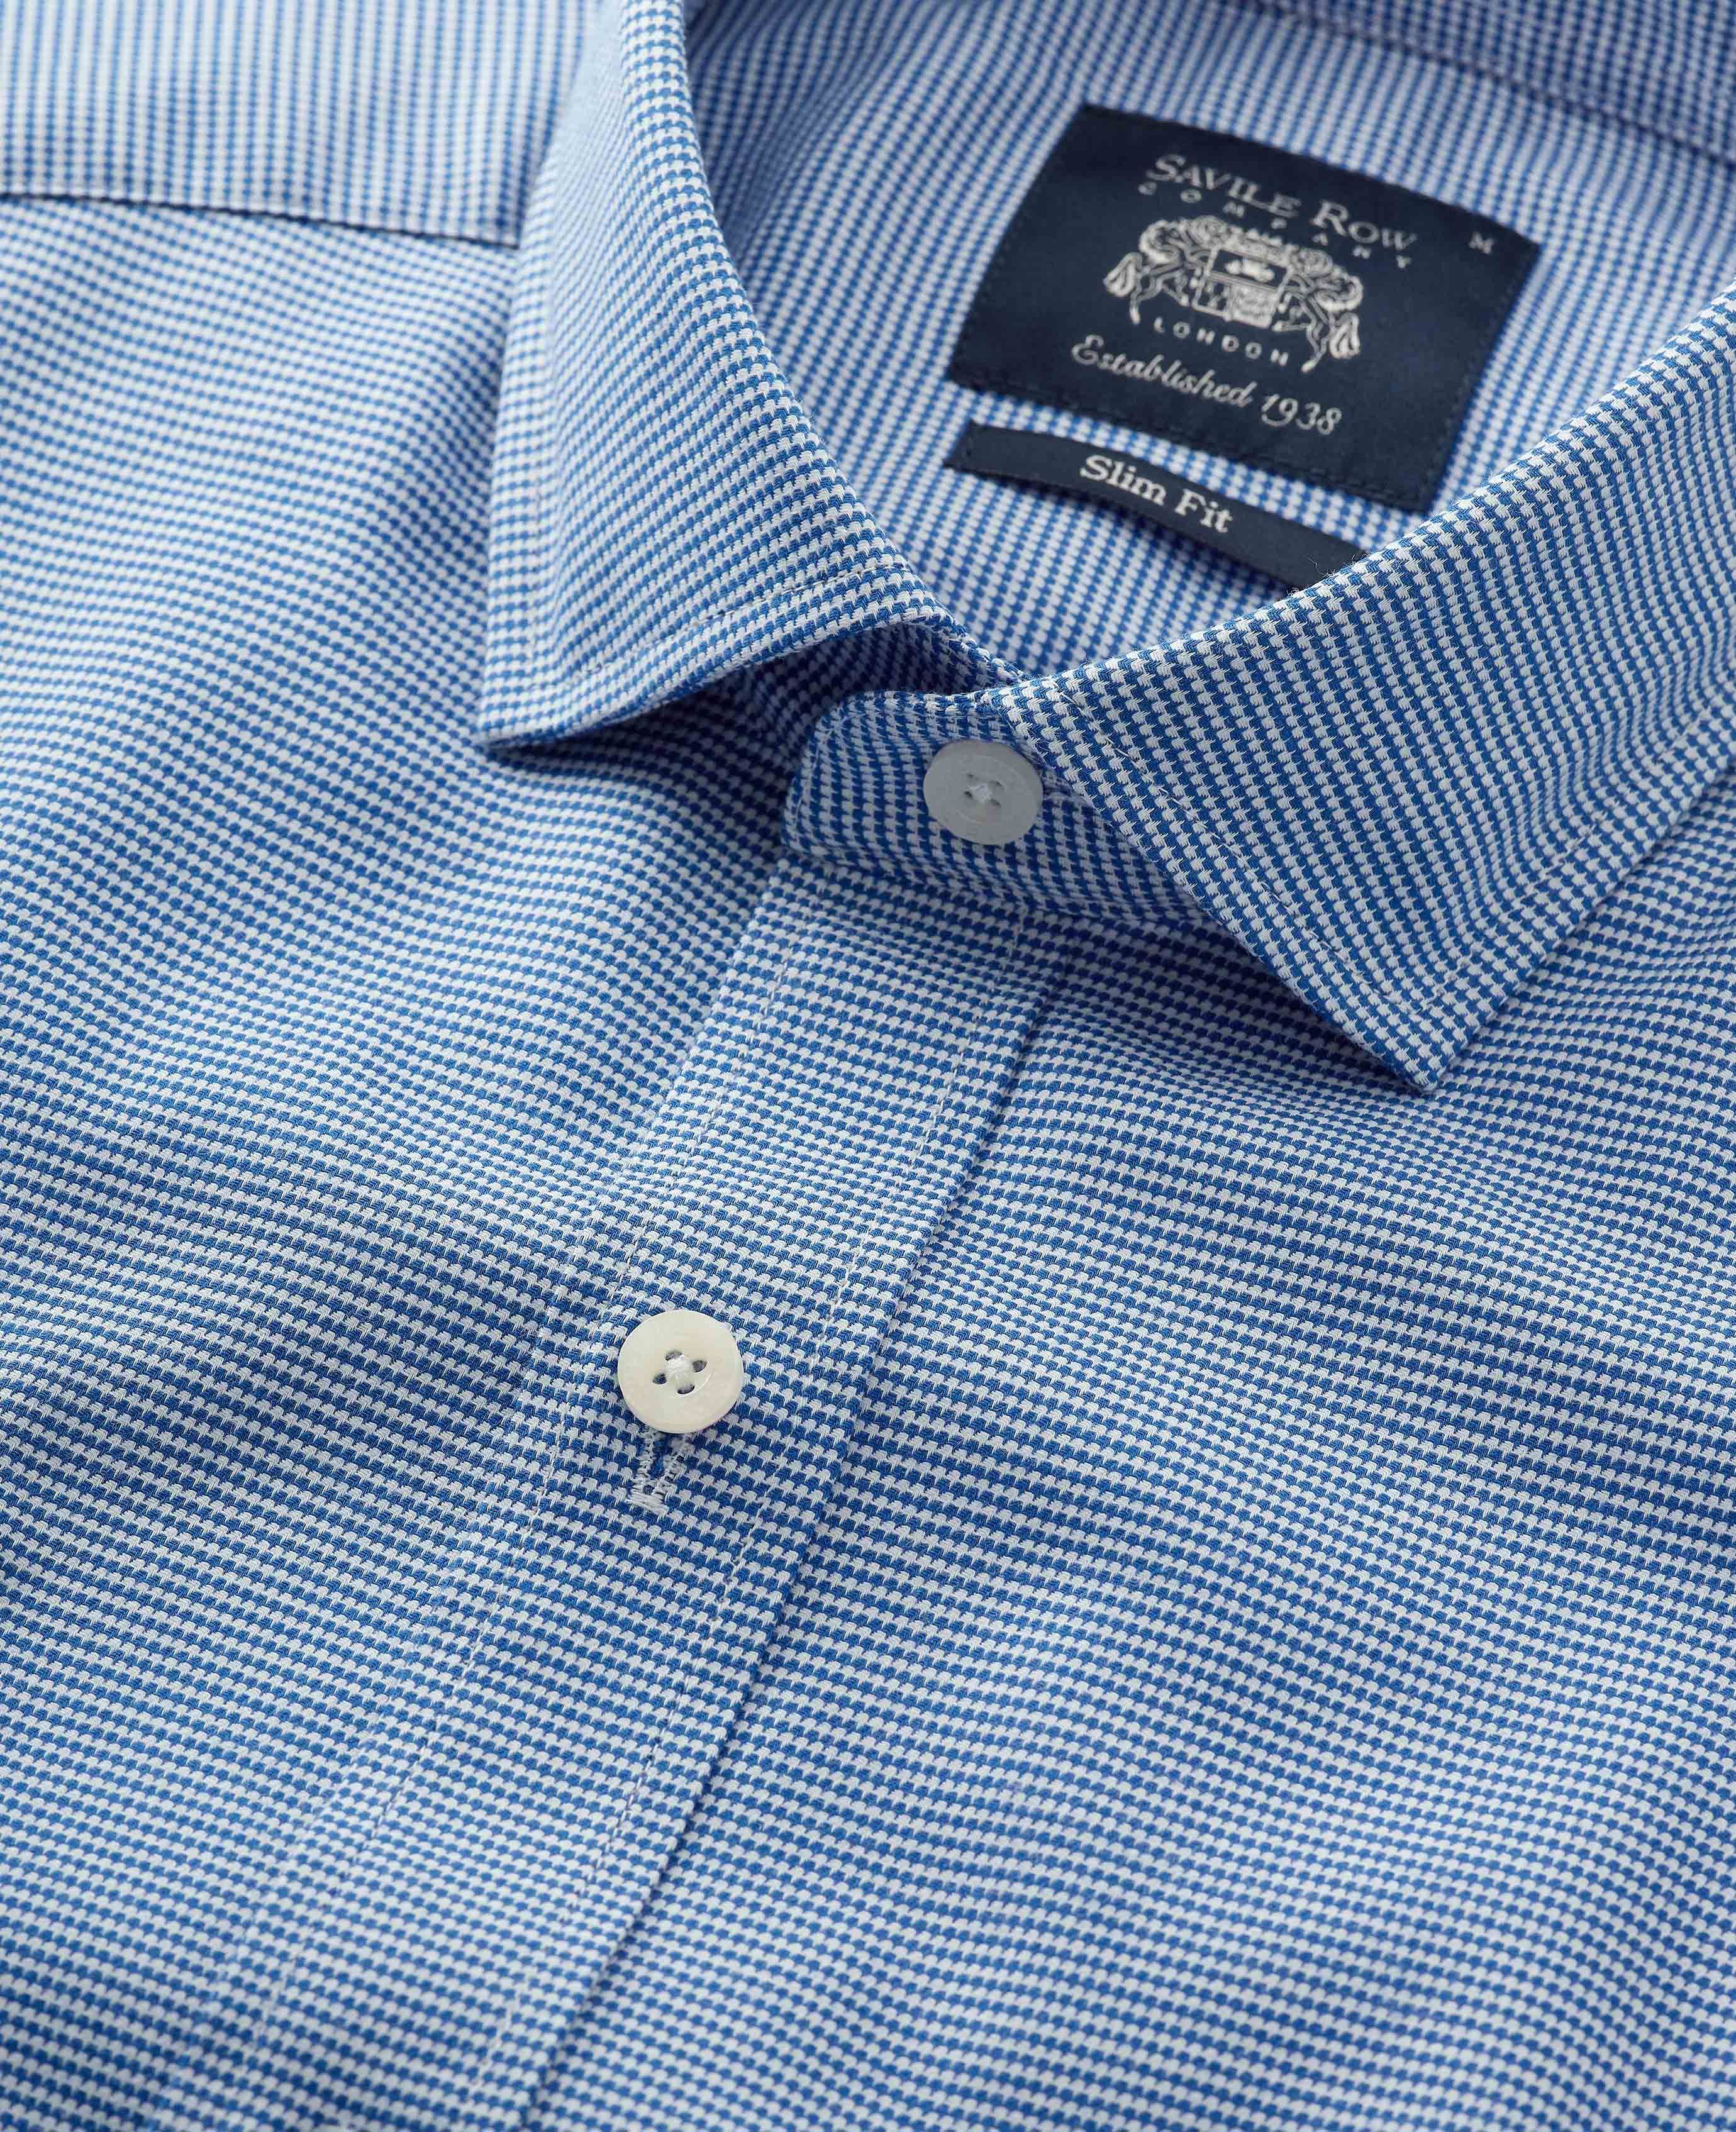 Men’s Smart Casual Stretch Shirt in Blue Puppytooth | Savile Row Co